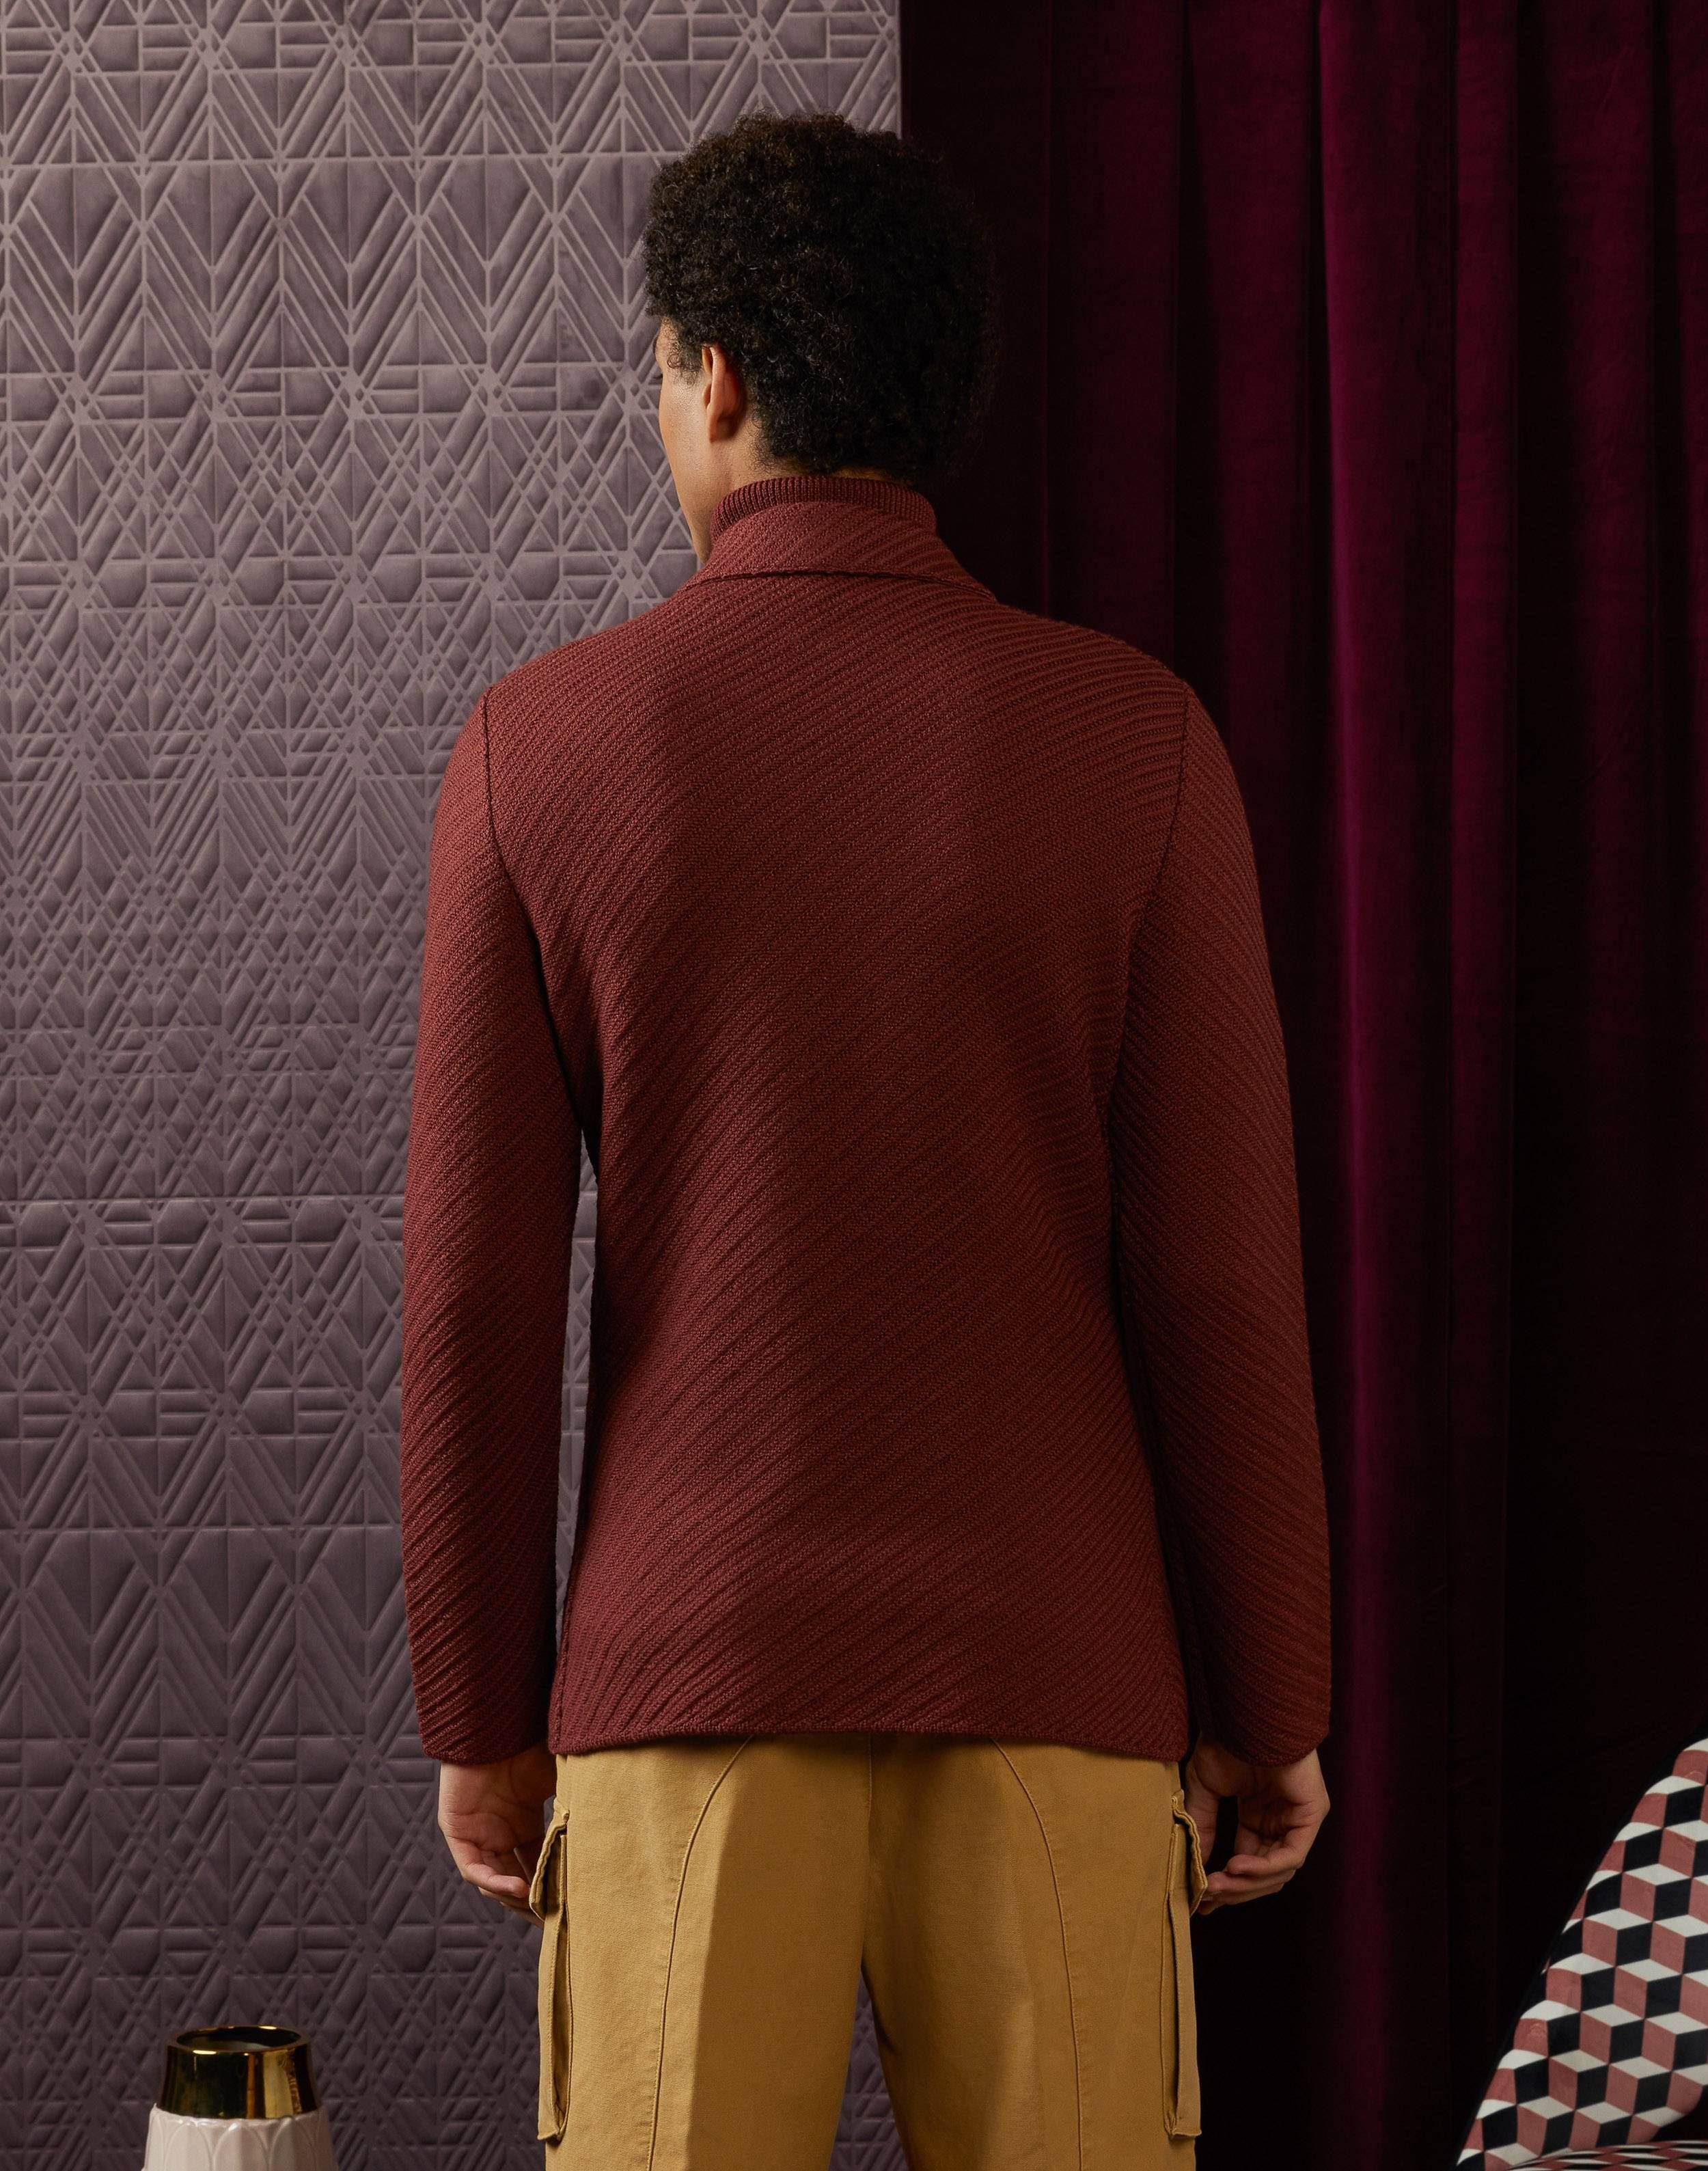 Double-breasted knitted jacket with diagonal jacquard patterning